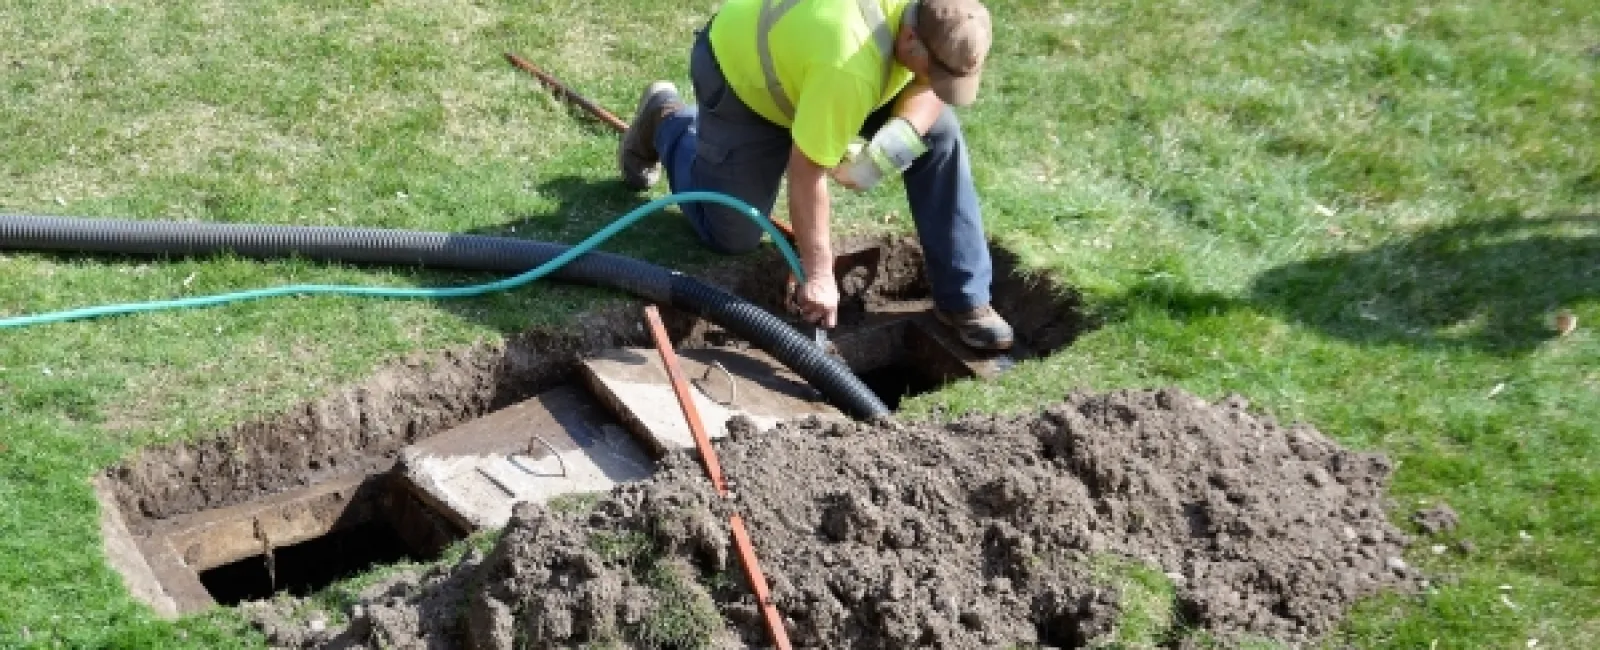 How to Take Care of Your New Septic System?